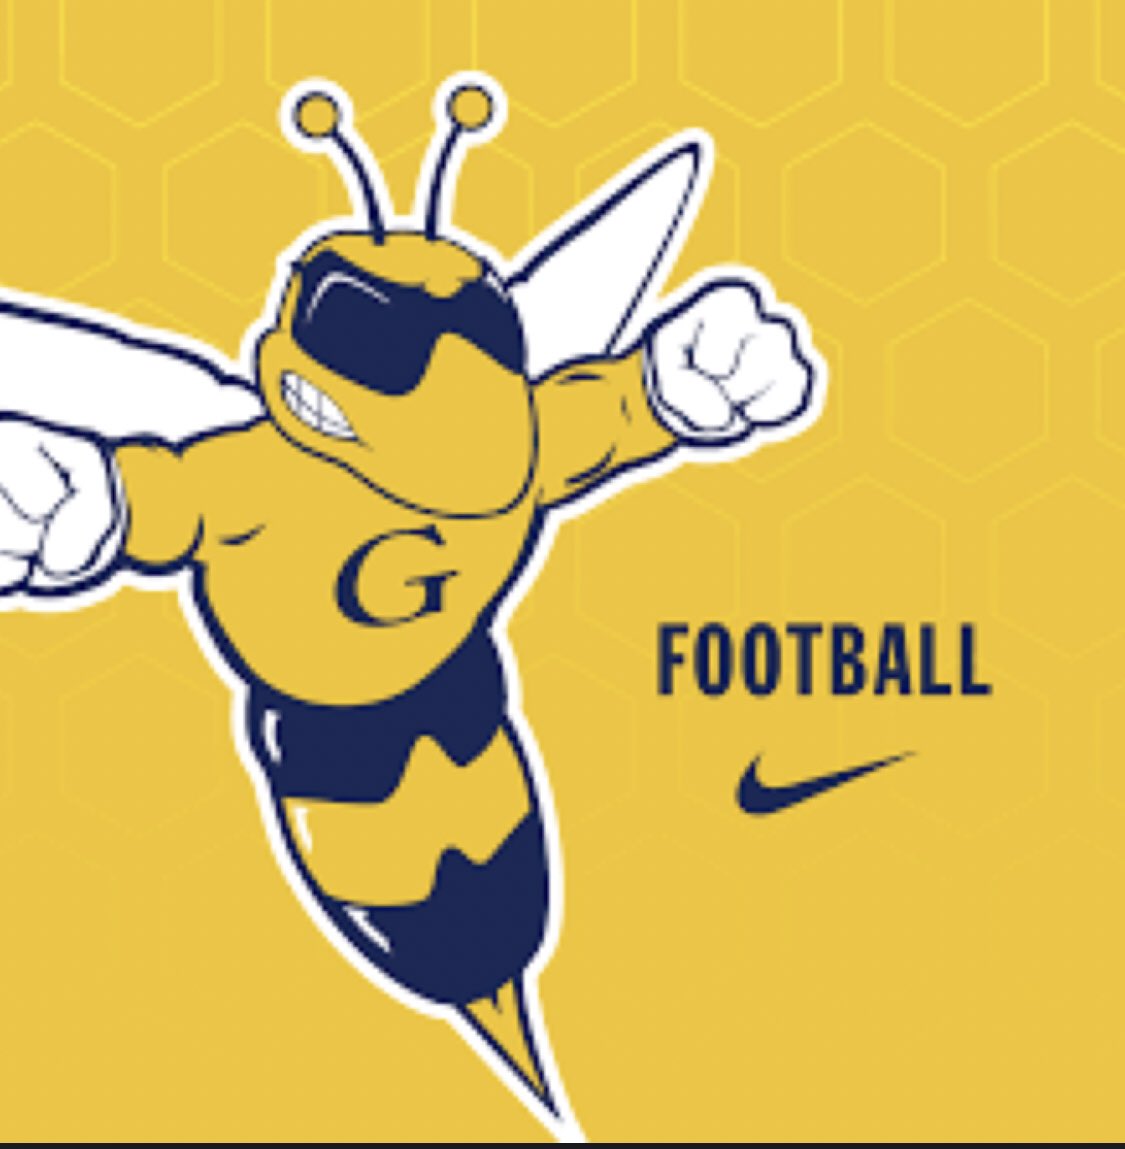 Thankful to receive an offer from @GracelandFB thank you @TwongU @JameslewisCoach @Coach_Handwork @MICFootball